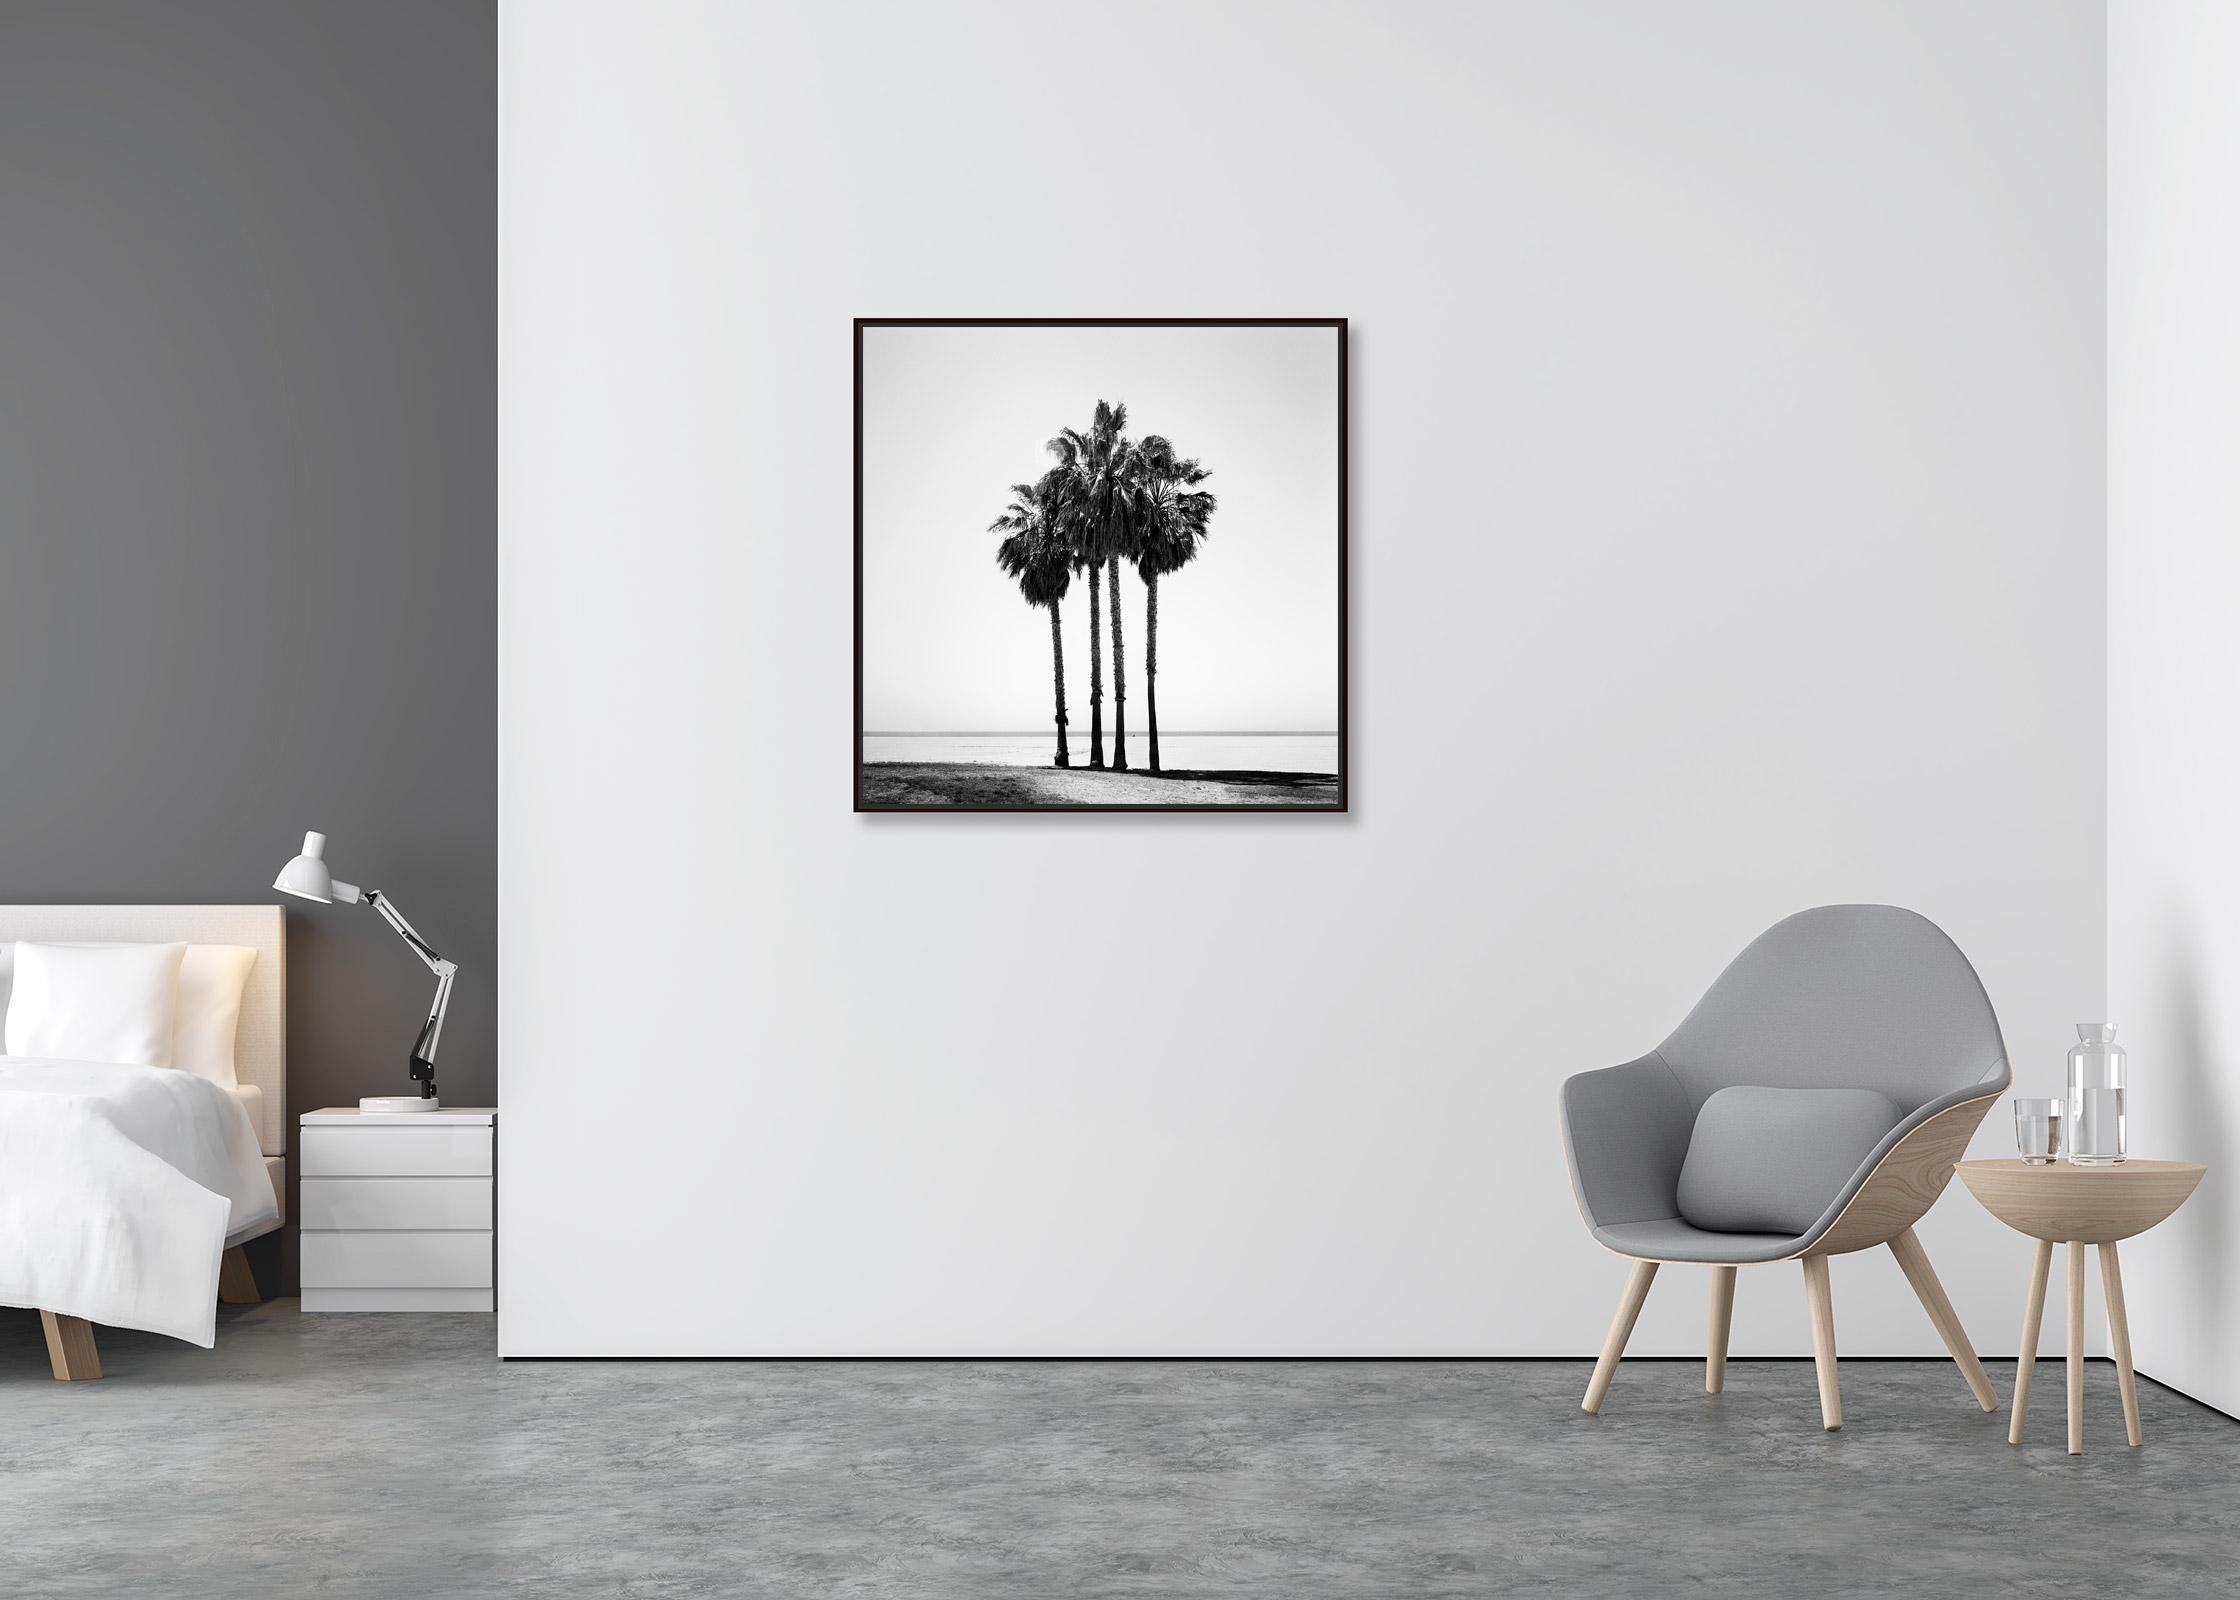 Four Palms, Venice Beach, California, black and white photography, landscape - Contemporary Photograph by Gerald Berghammer